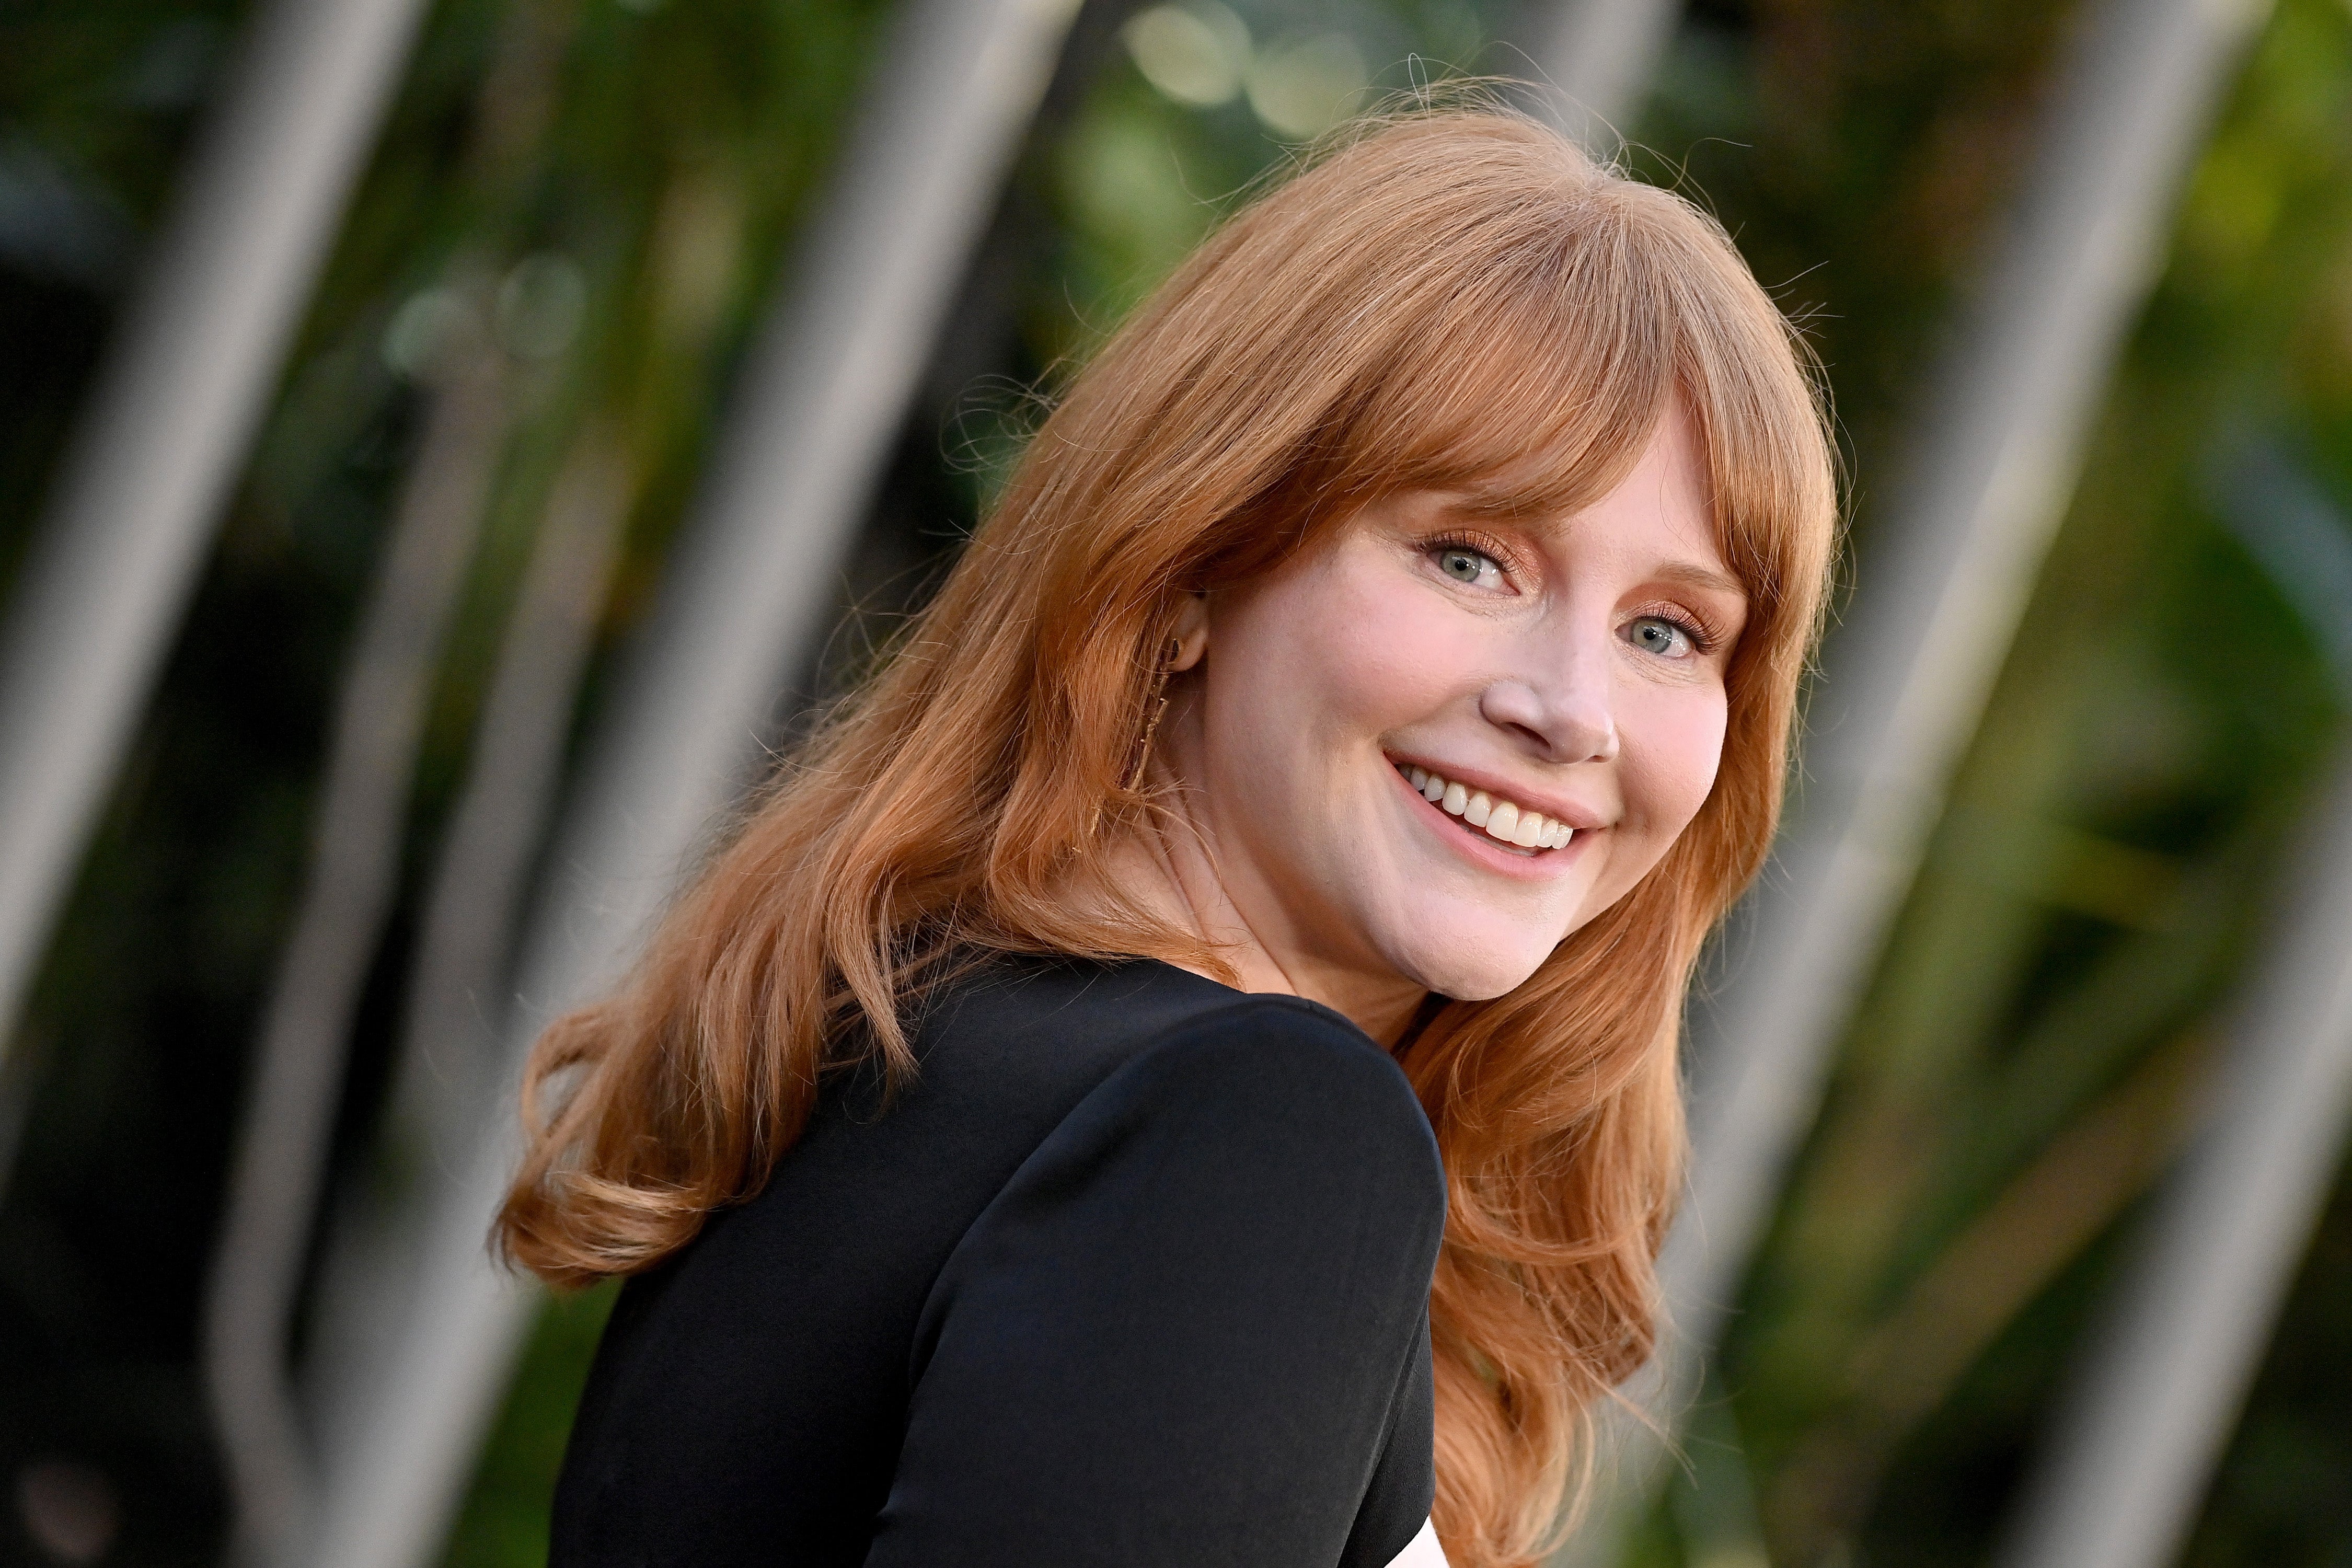 Bryce Dallas Howard Says ‘Jurassic World Dominion’ Filmmakers Wanted Her to ‘Lose Weight’